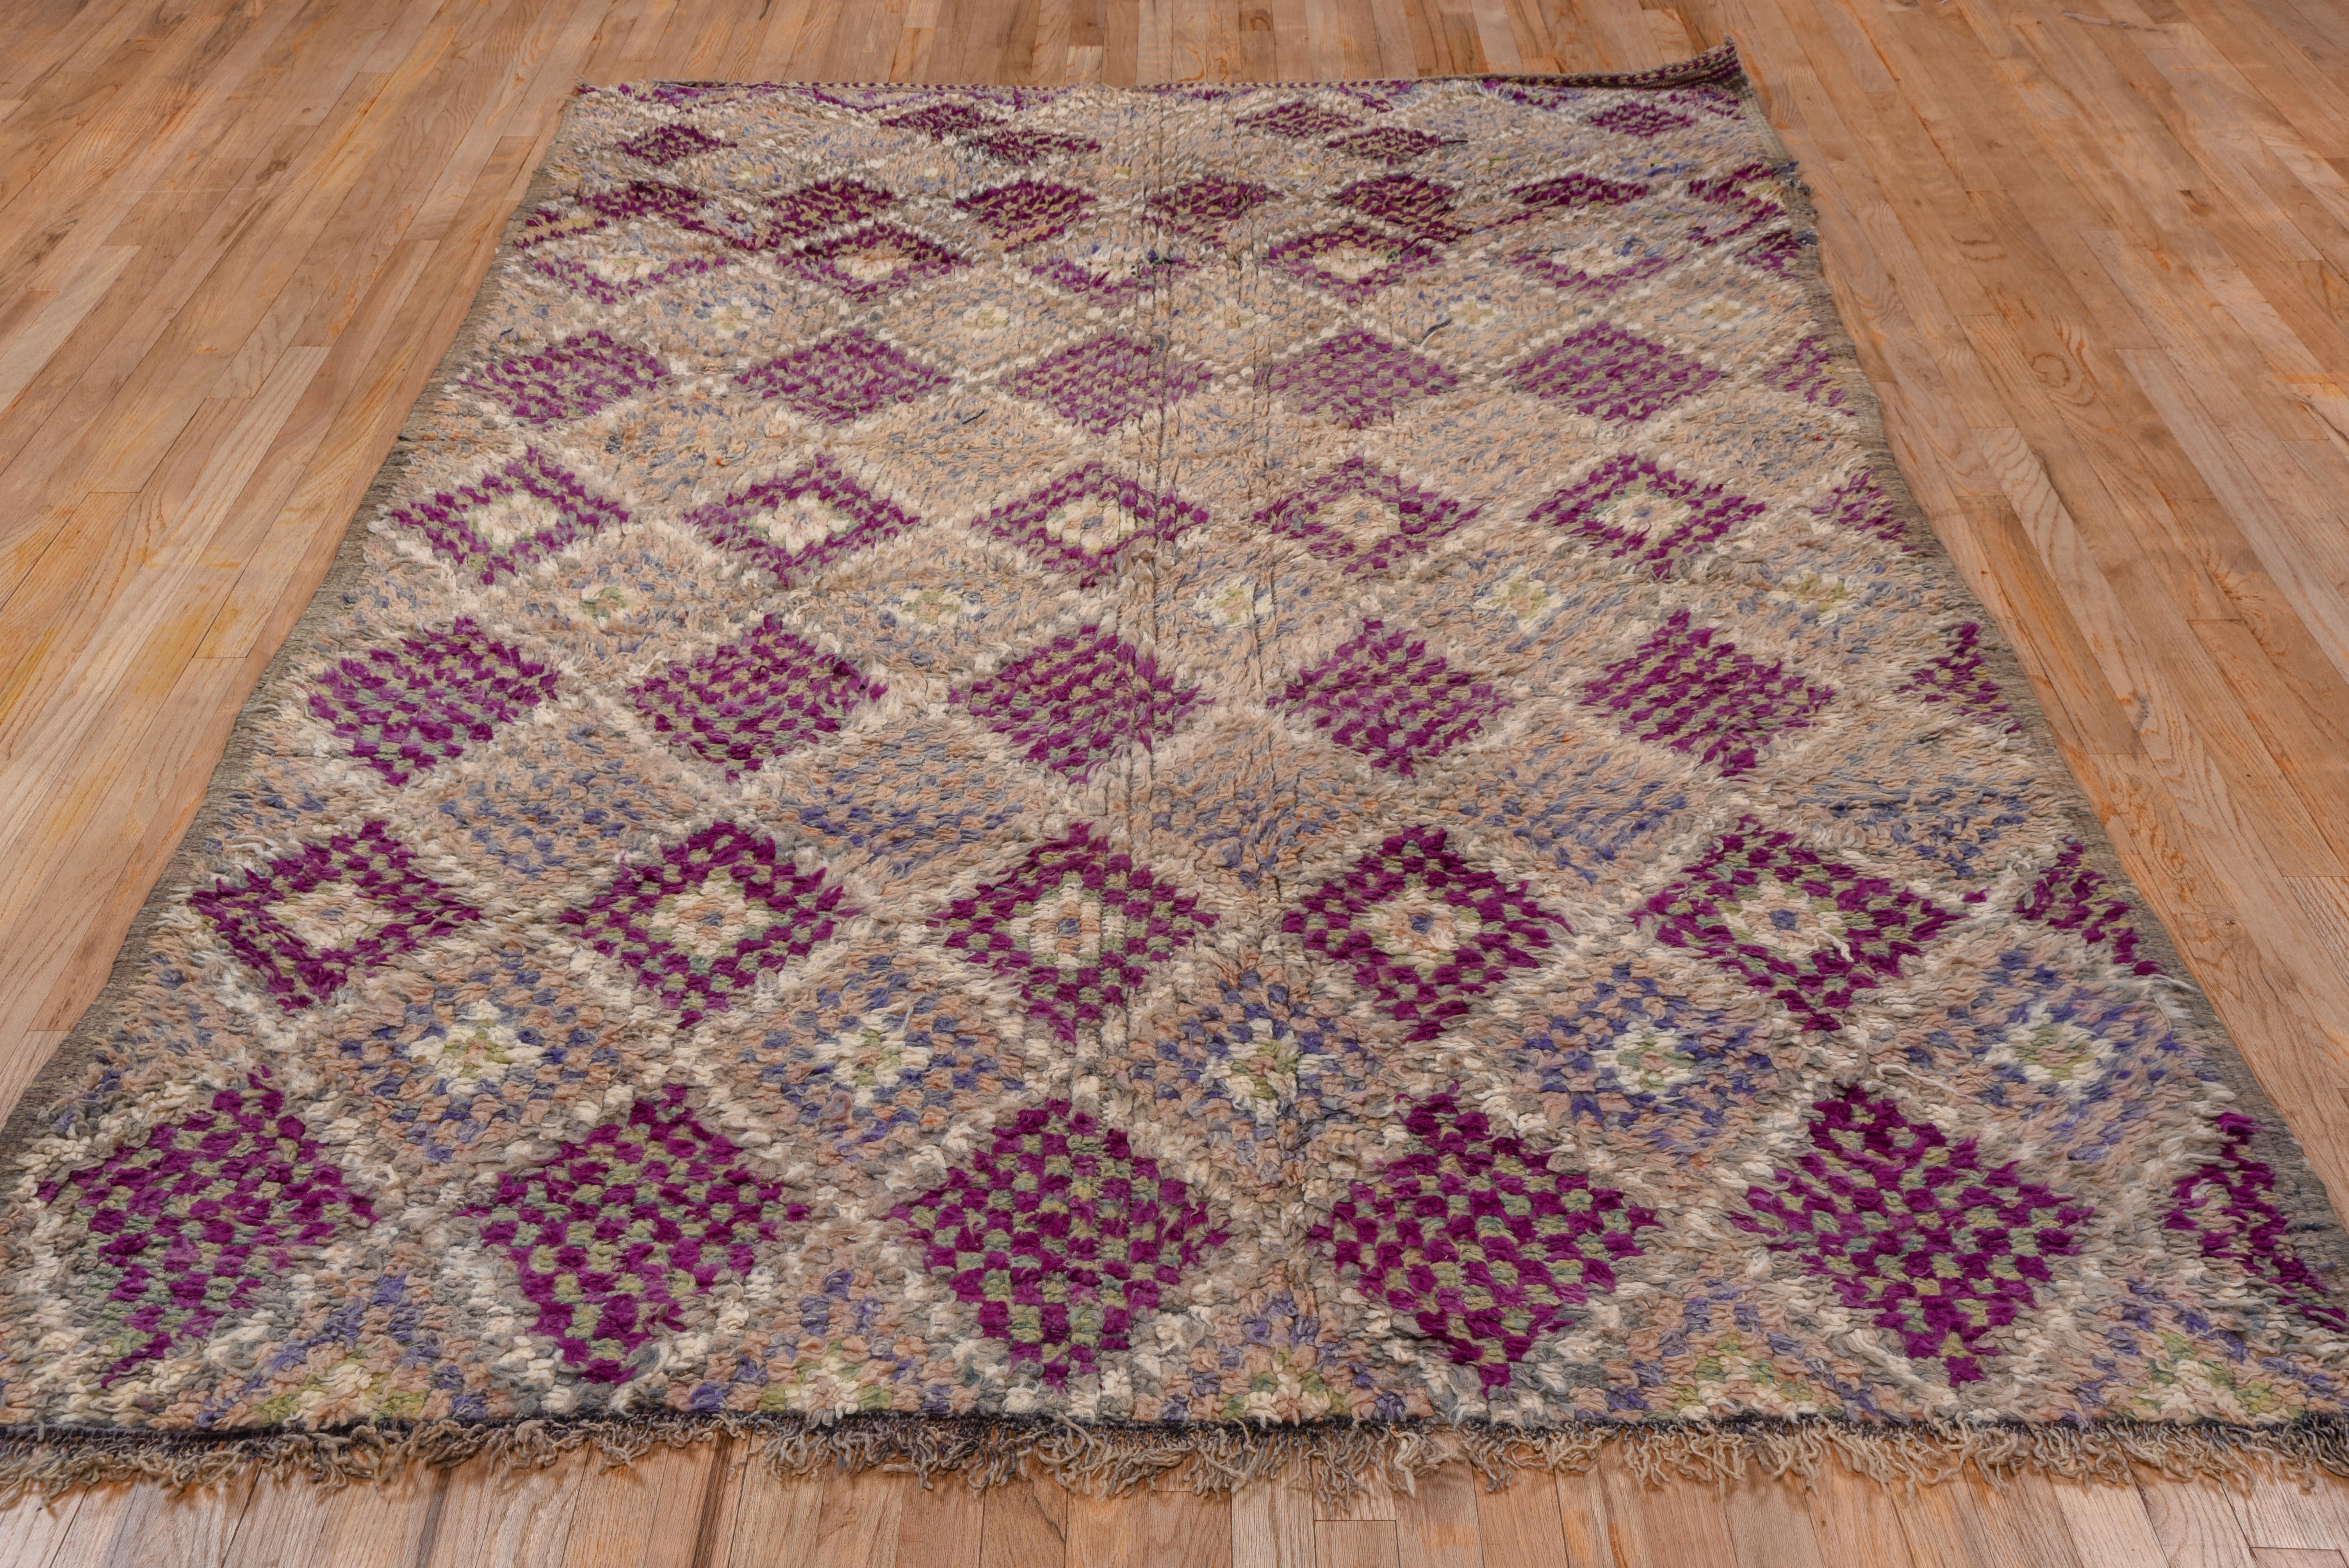 20th Century Antique Multitierd Moroccan Diamond Pattern Rug in Faded Purple and Creamy Brown For Sale